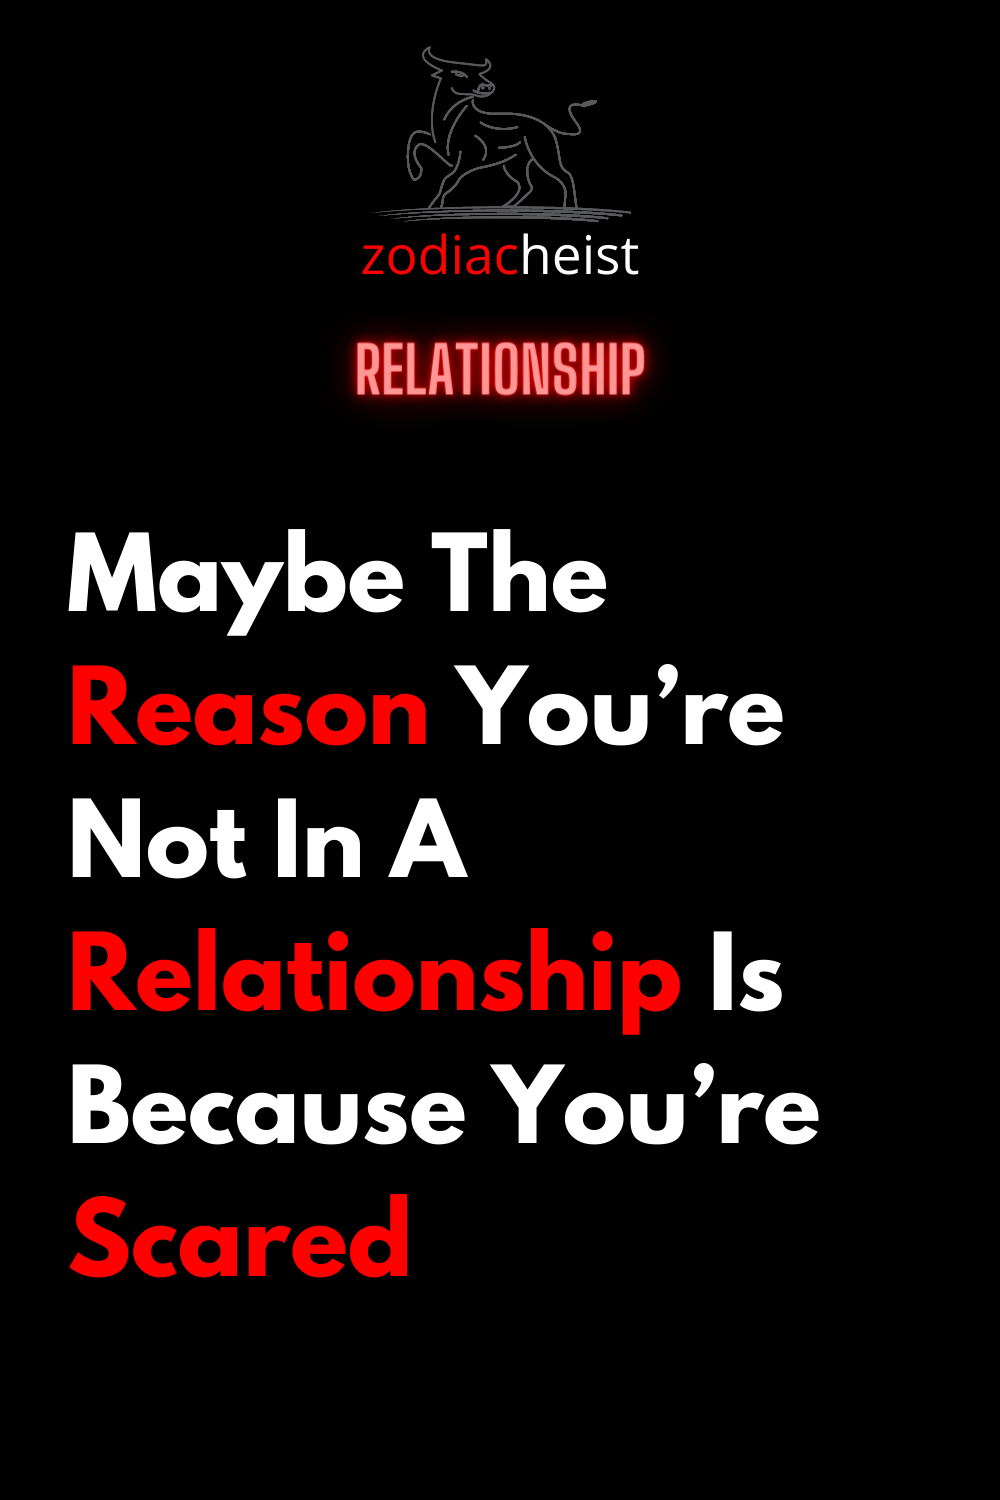 Maybe The Reason You’re Not In A Relationship Is Because You’re Scared